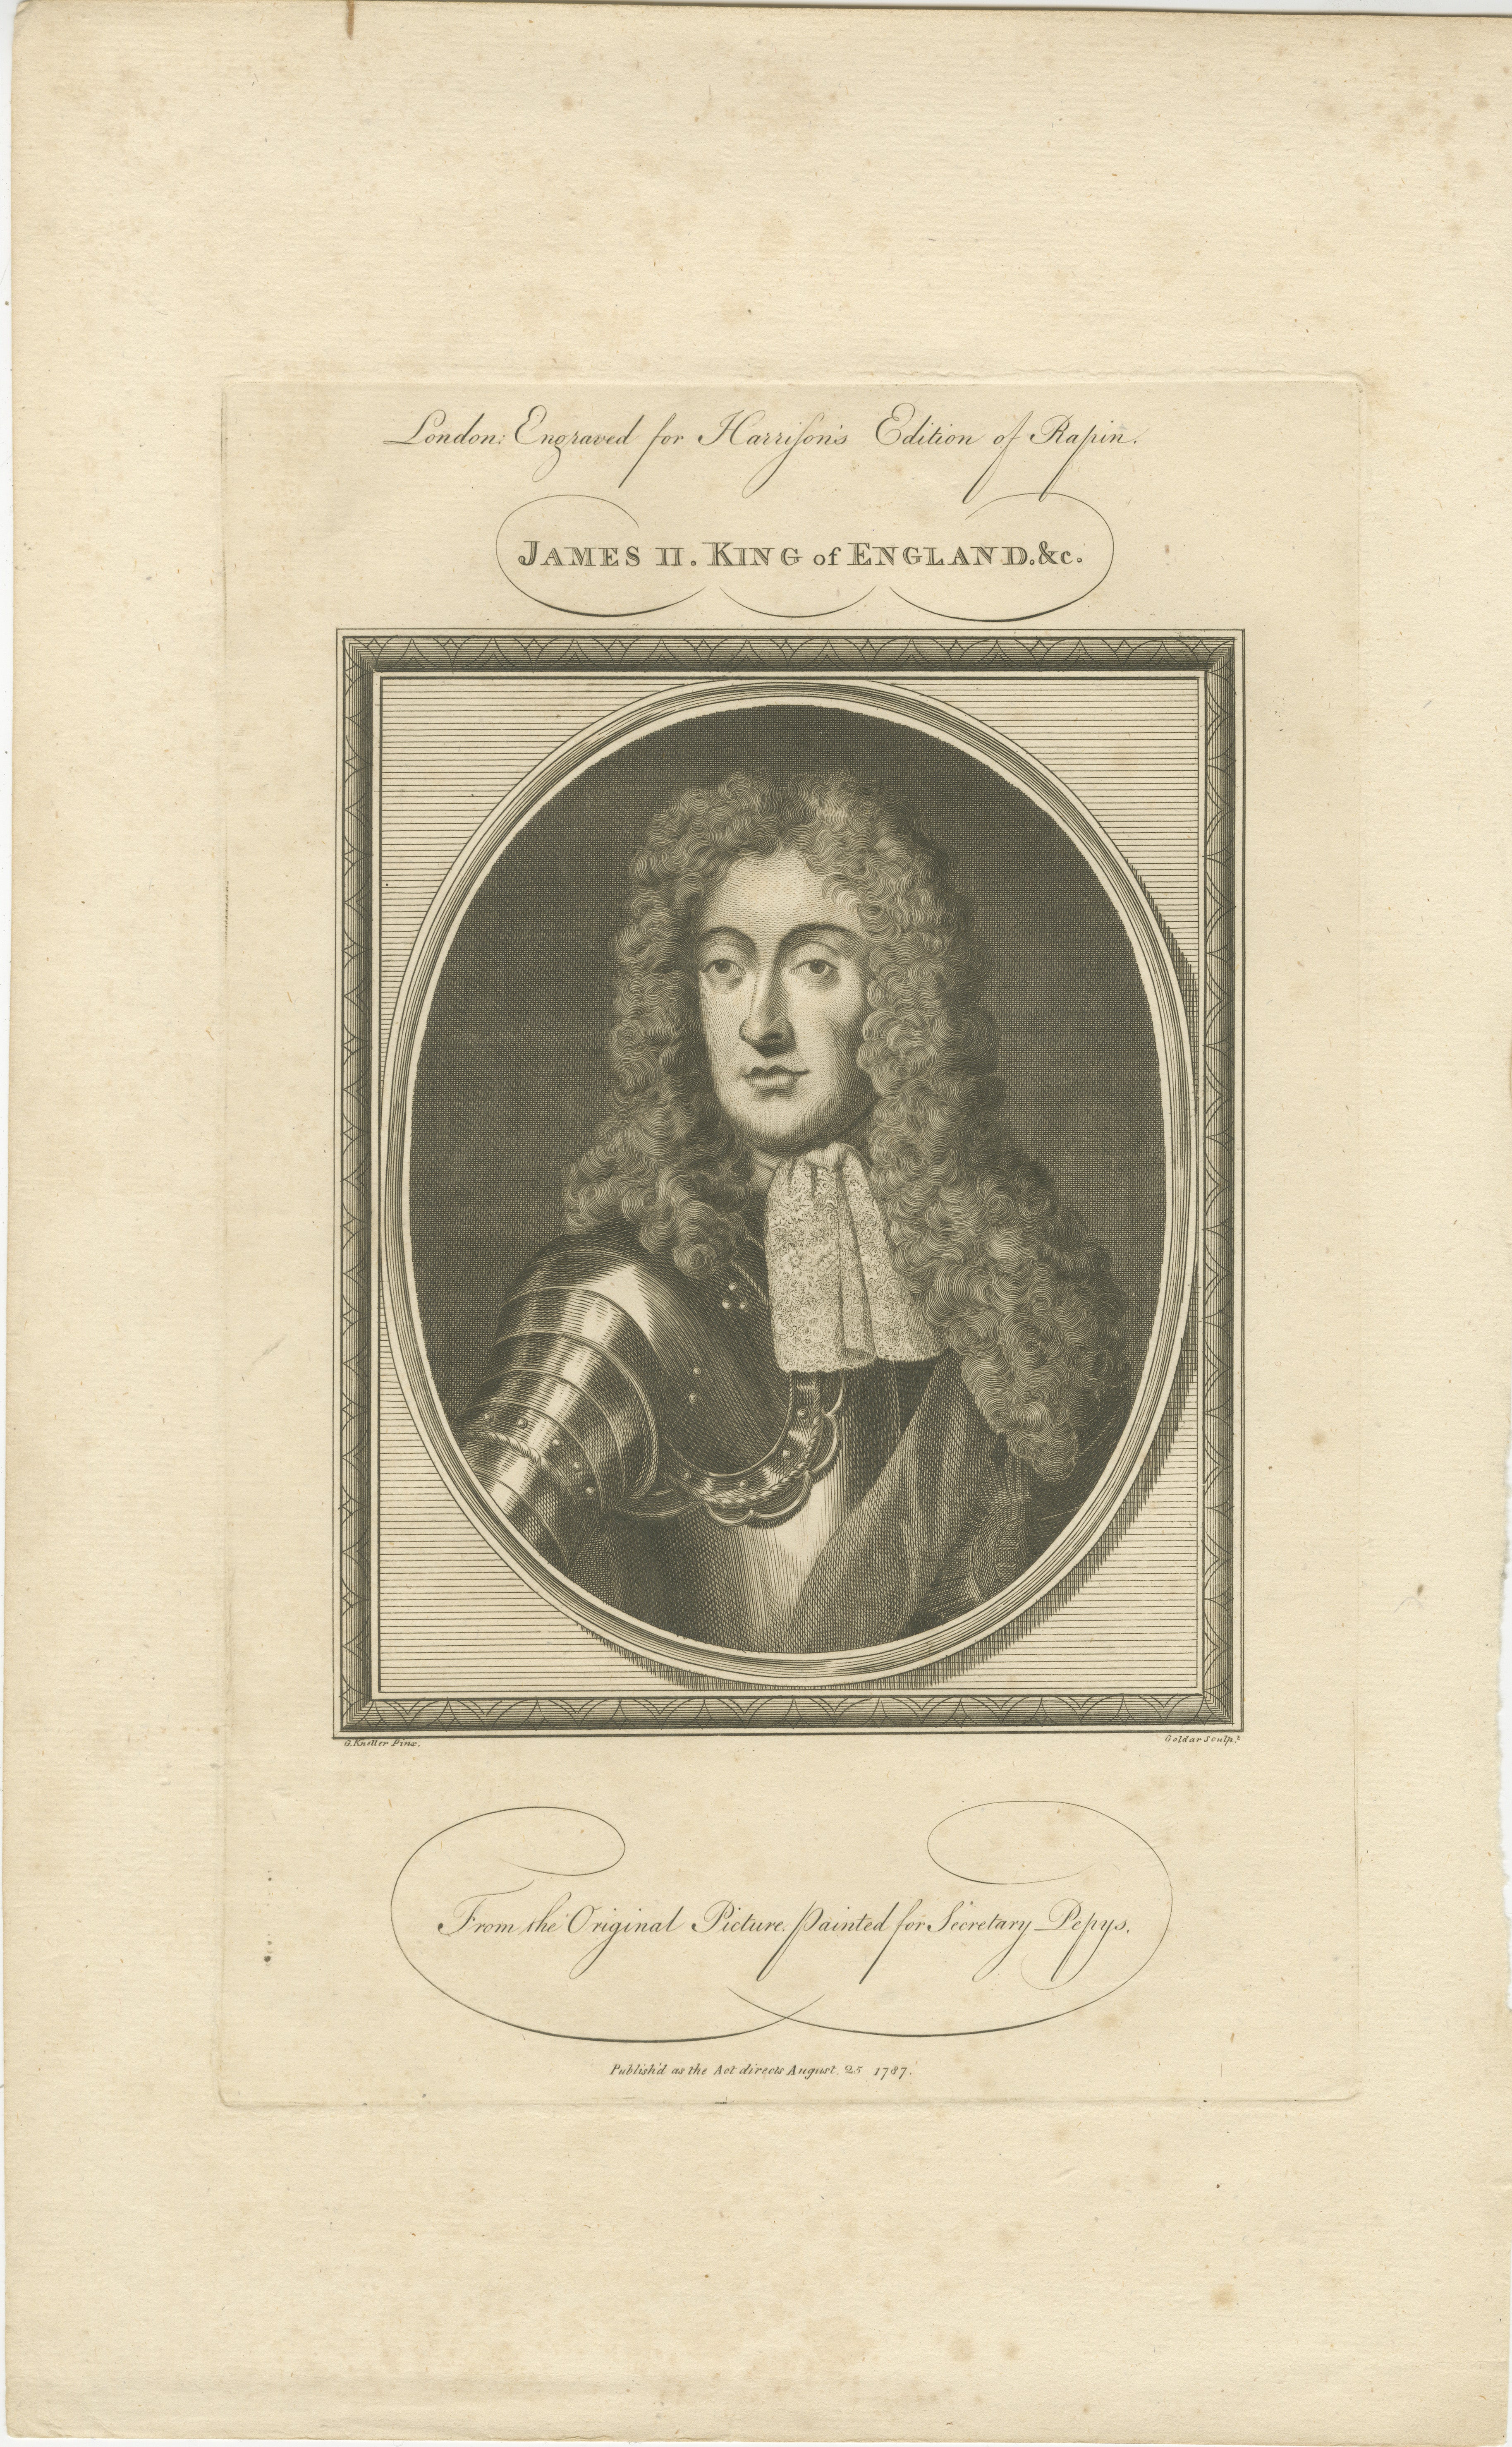 An original engraved portrait of James II, King of England. 

The style of the engraving and the attire of the individual are consistent with late 17th-century fashion, aligning with James II's reign from 1685 to 1688. 

The text beneath the image